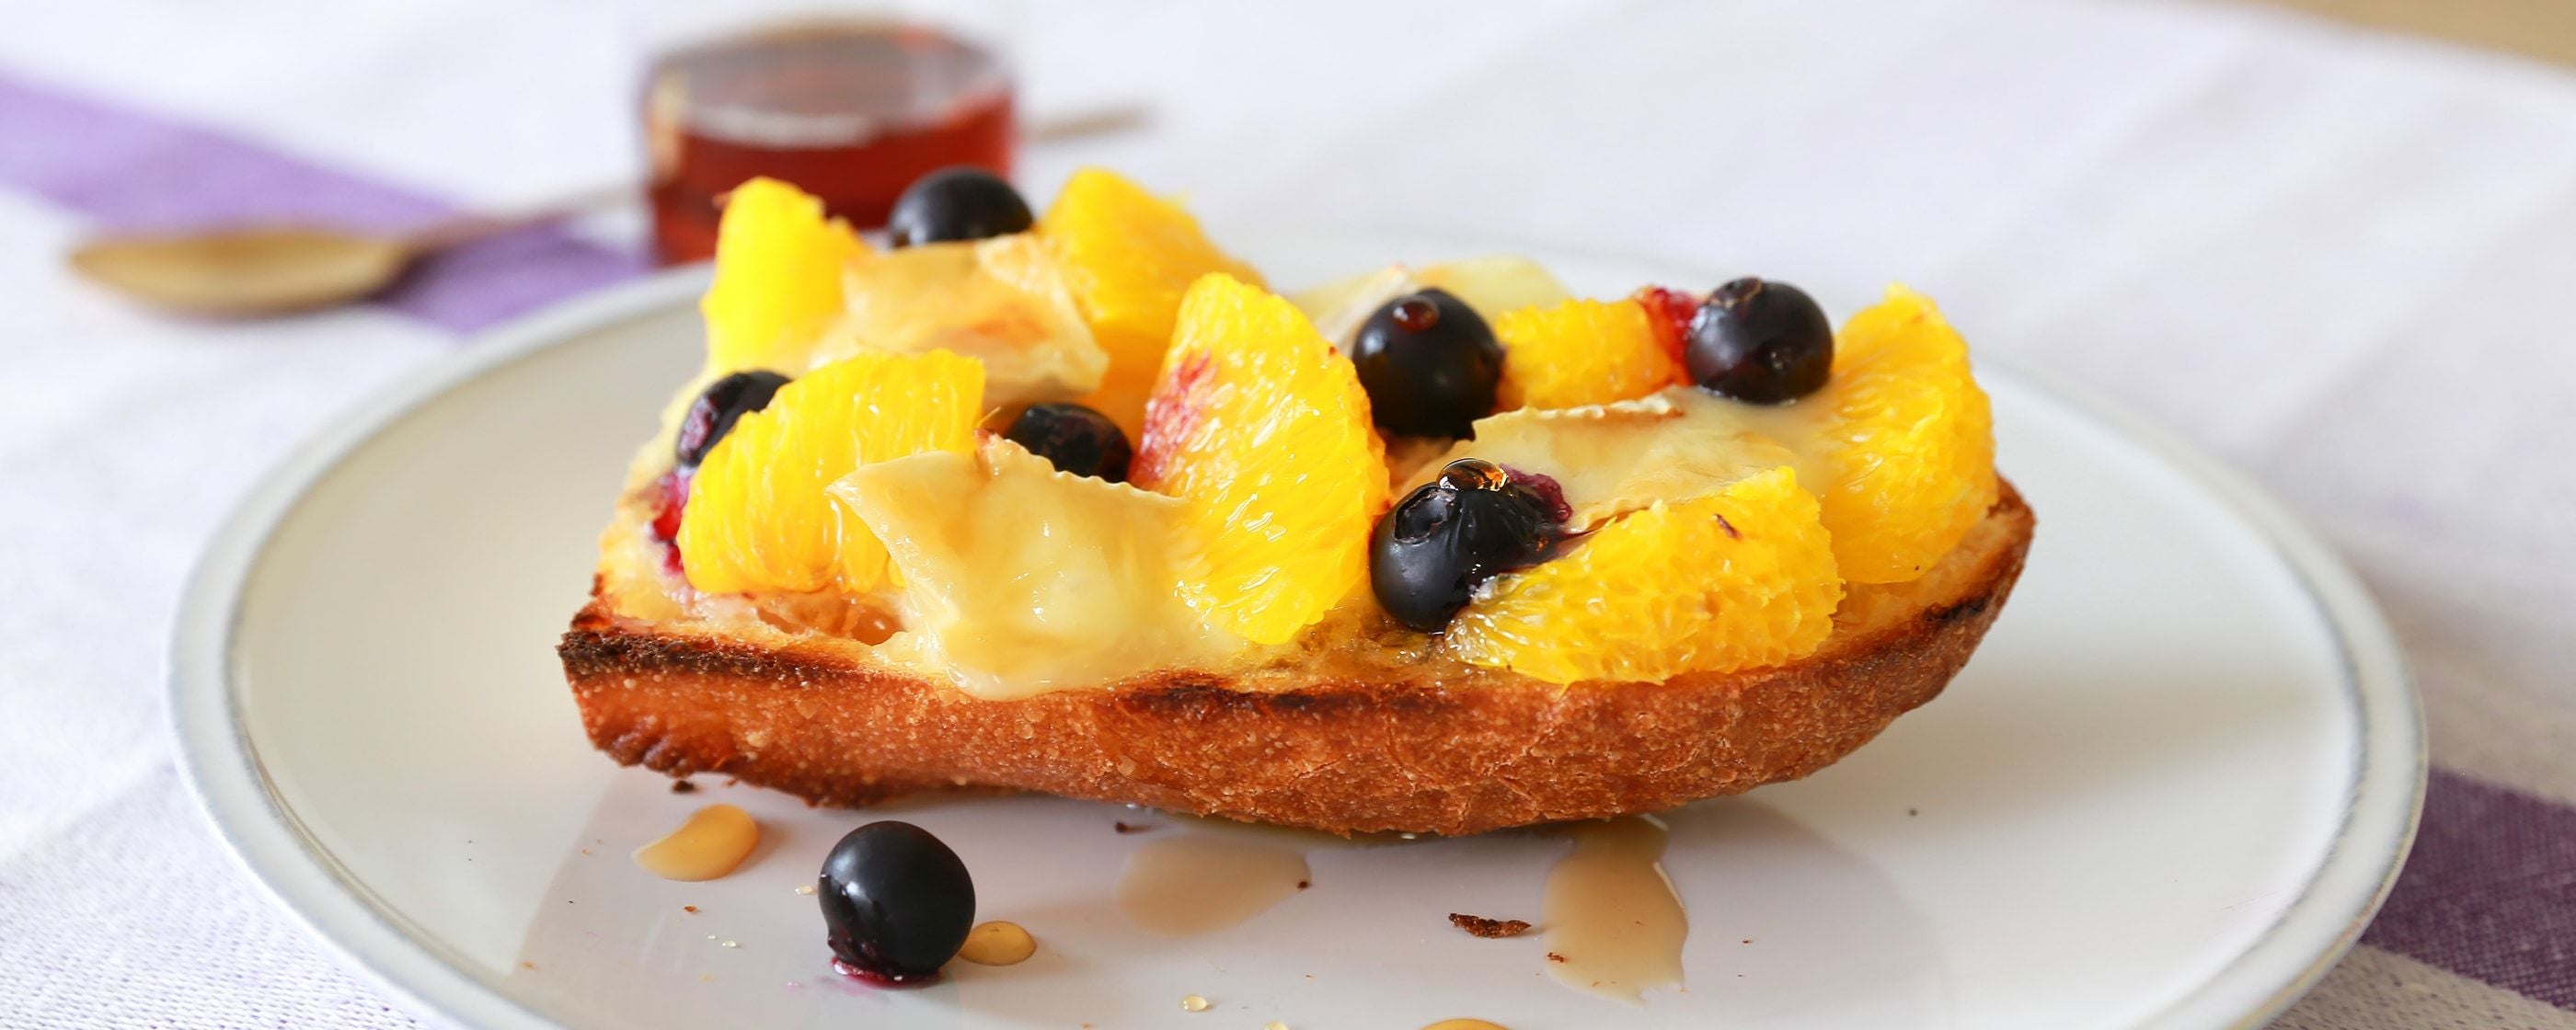 Camembert with Fruit on Toast